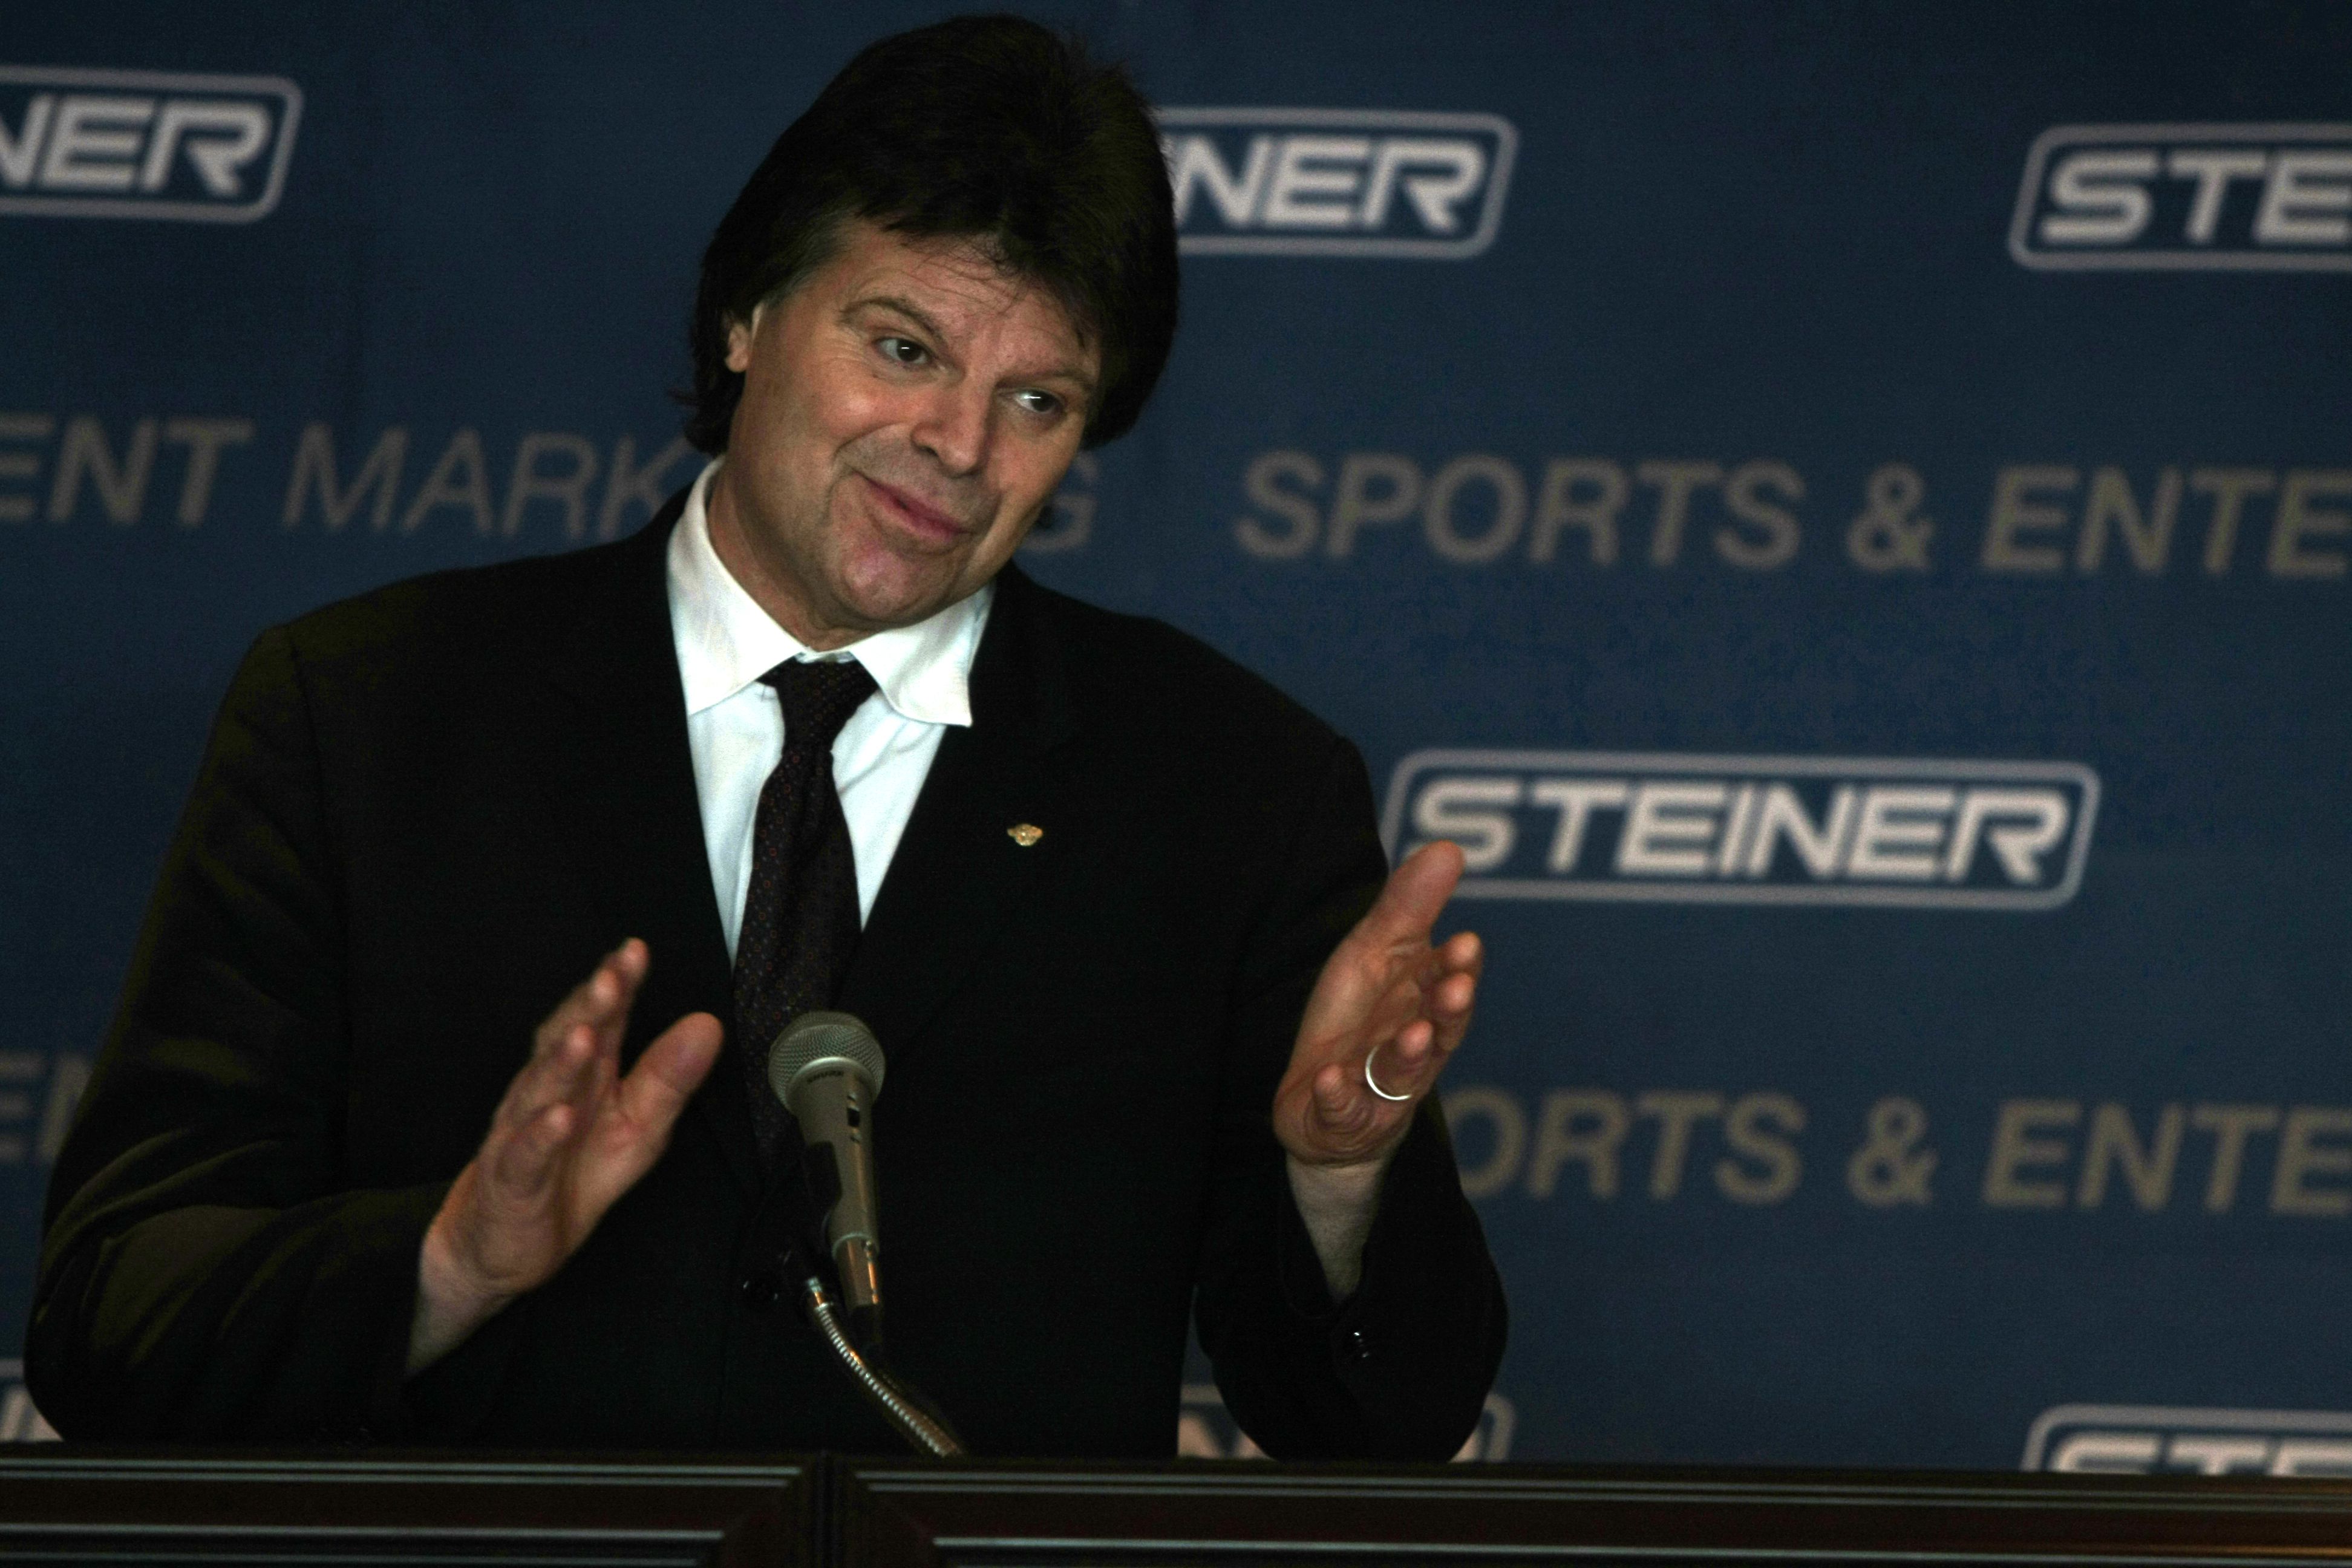 Jets great Gastineau says poor health due to football